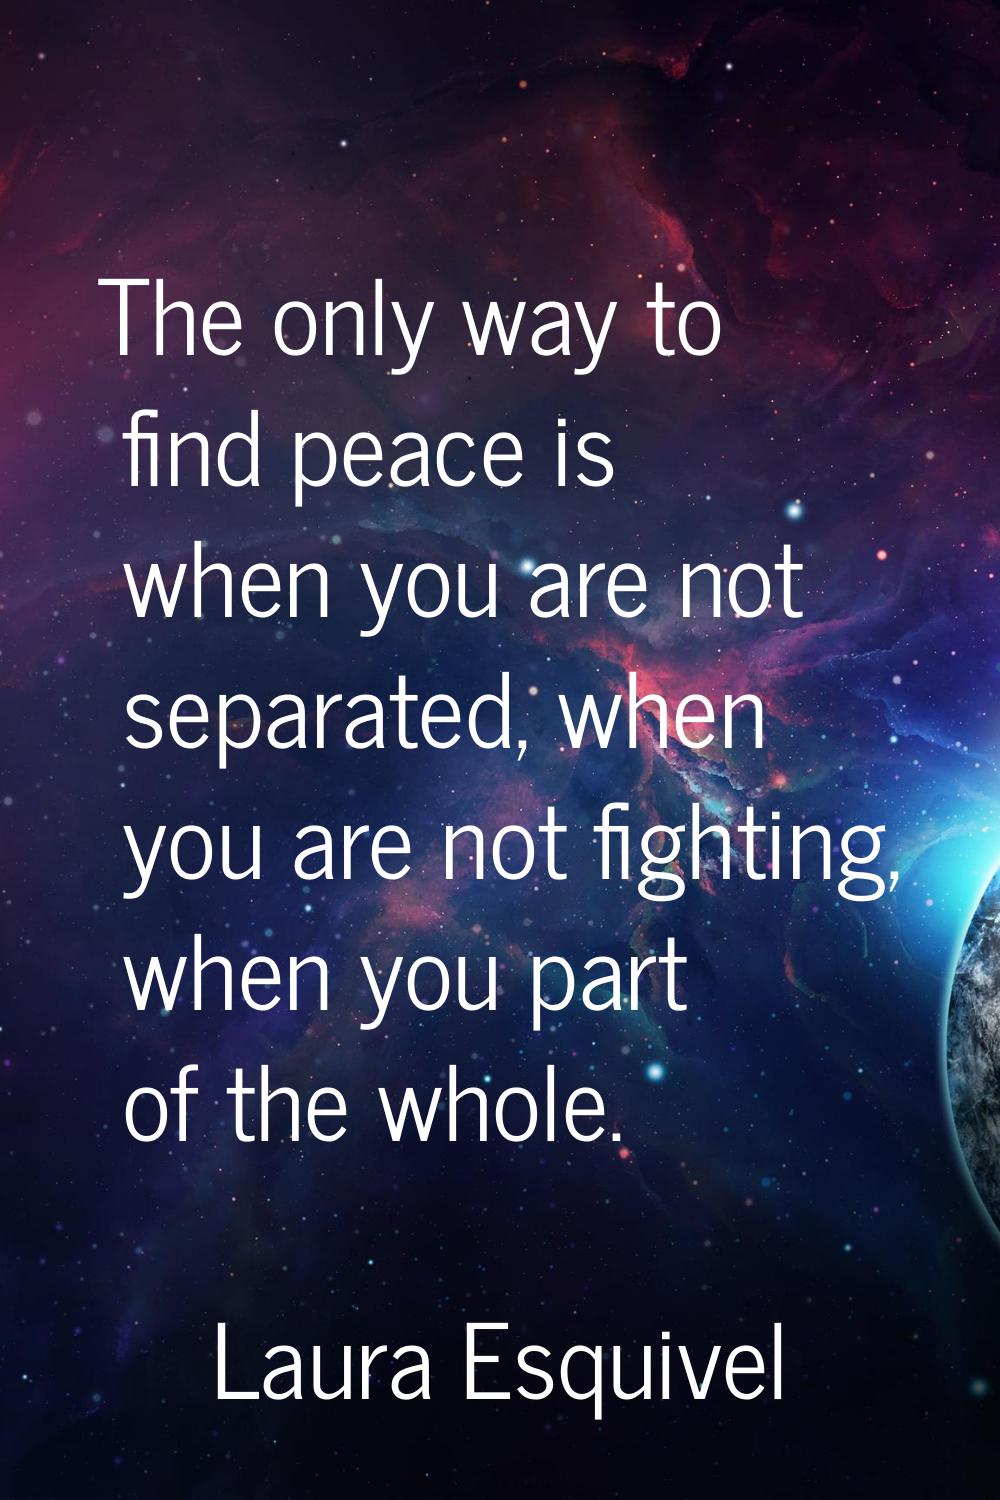 The only way to find peace is when you are not separated, when you are not fighting, when you part 